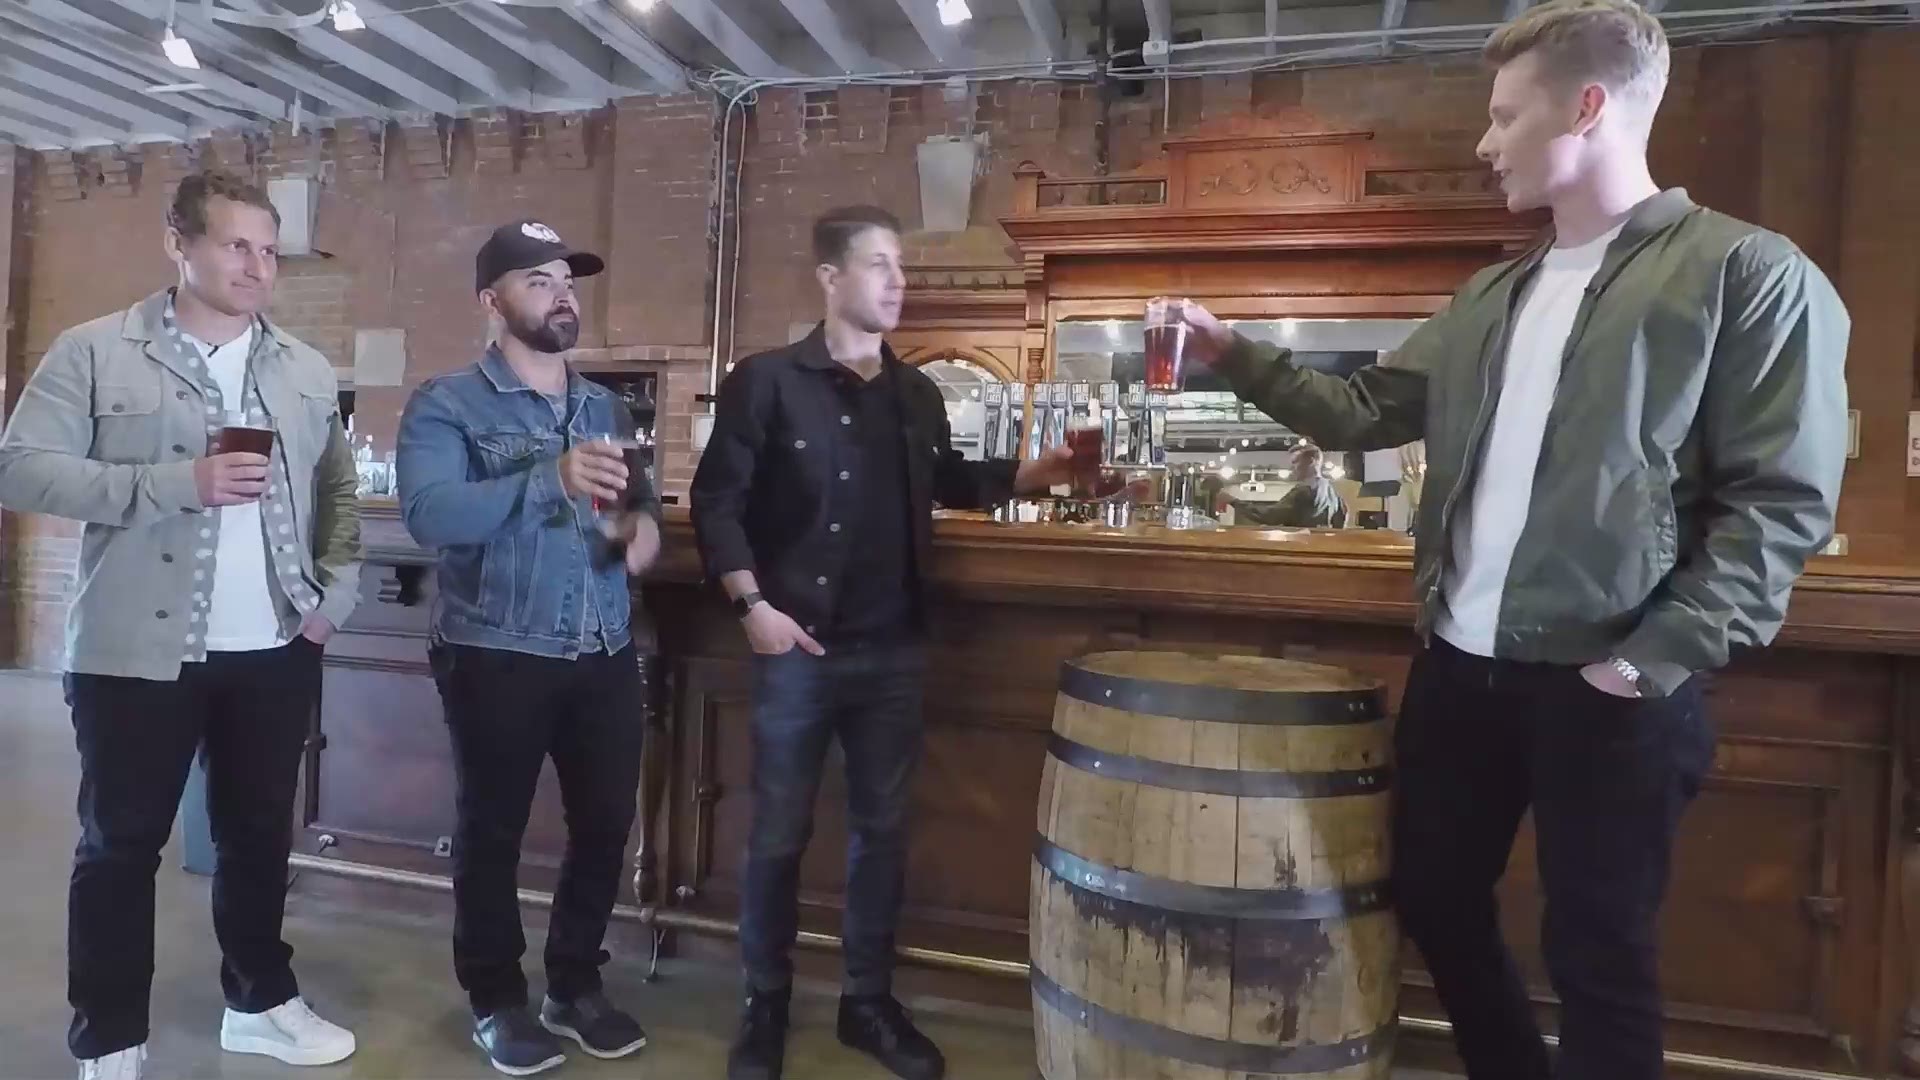 The band members of O.A.R. hung out with WKYC's Austin Love to discuss their career and new beer partnership with Great Lakes Brewing Co.